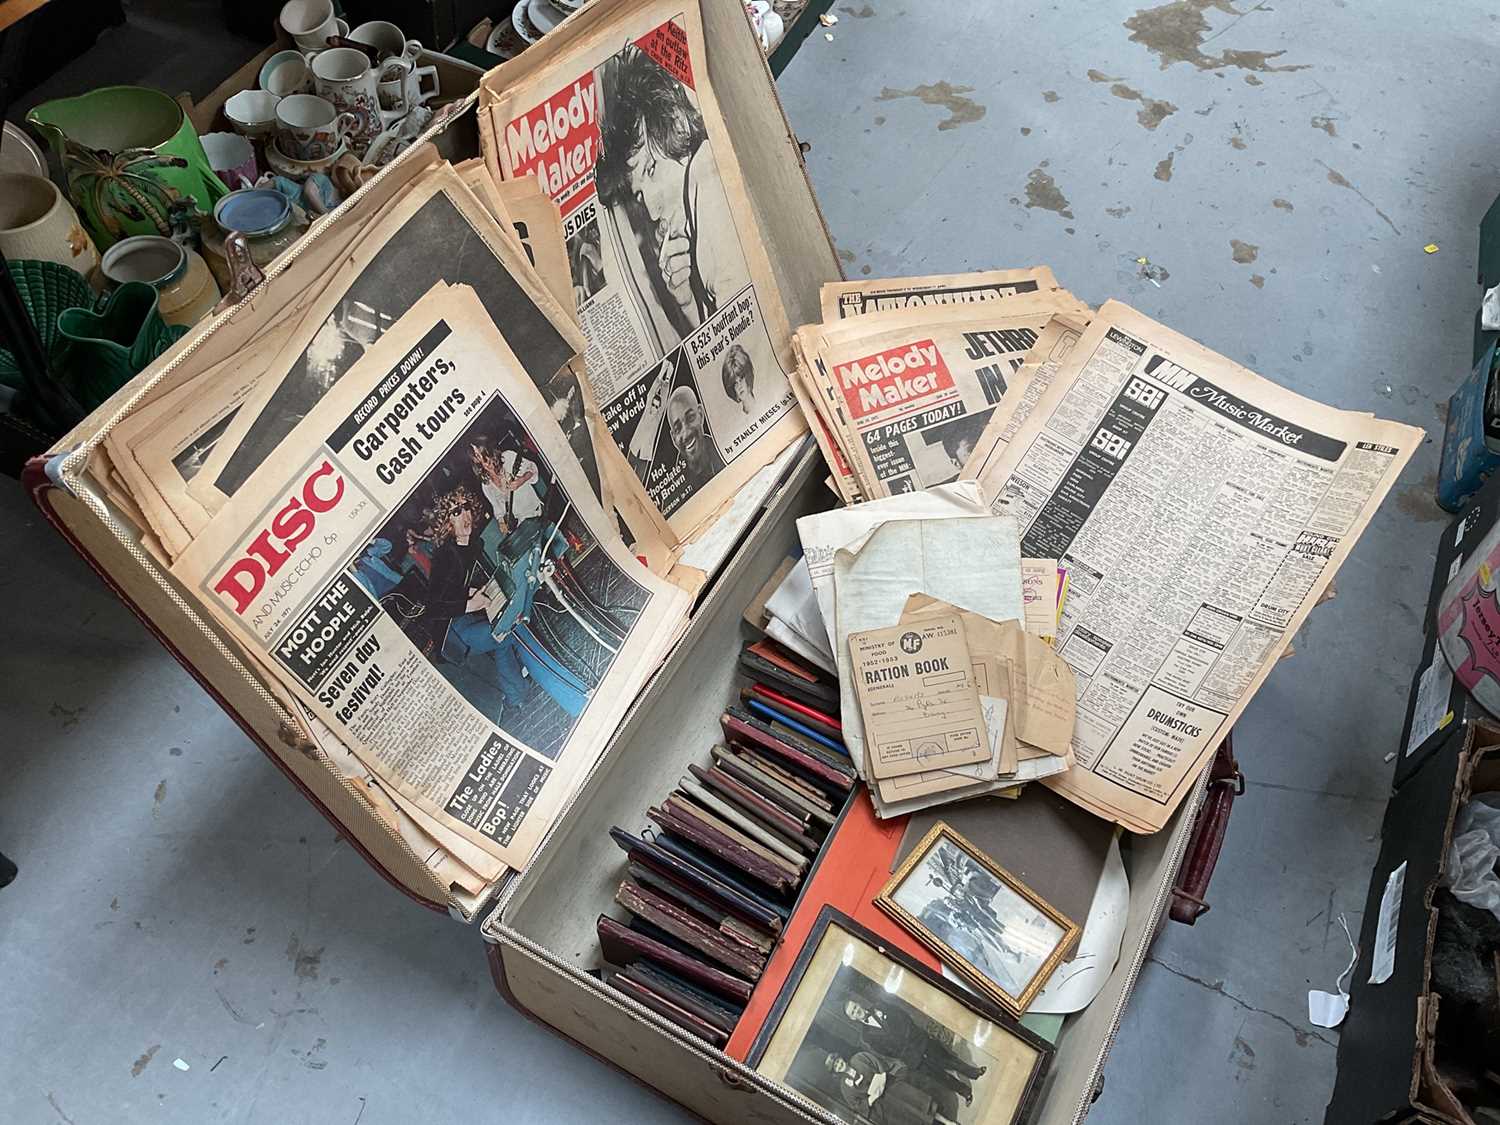 Collection of vintage ephemera including Melody Maker, Disc and other music ephemera contained in a